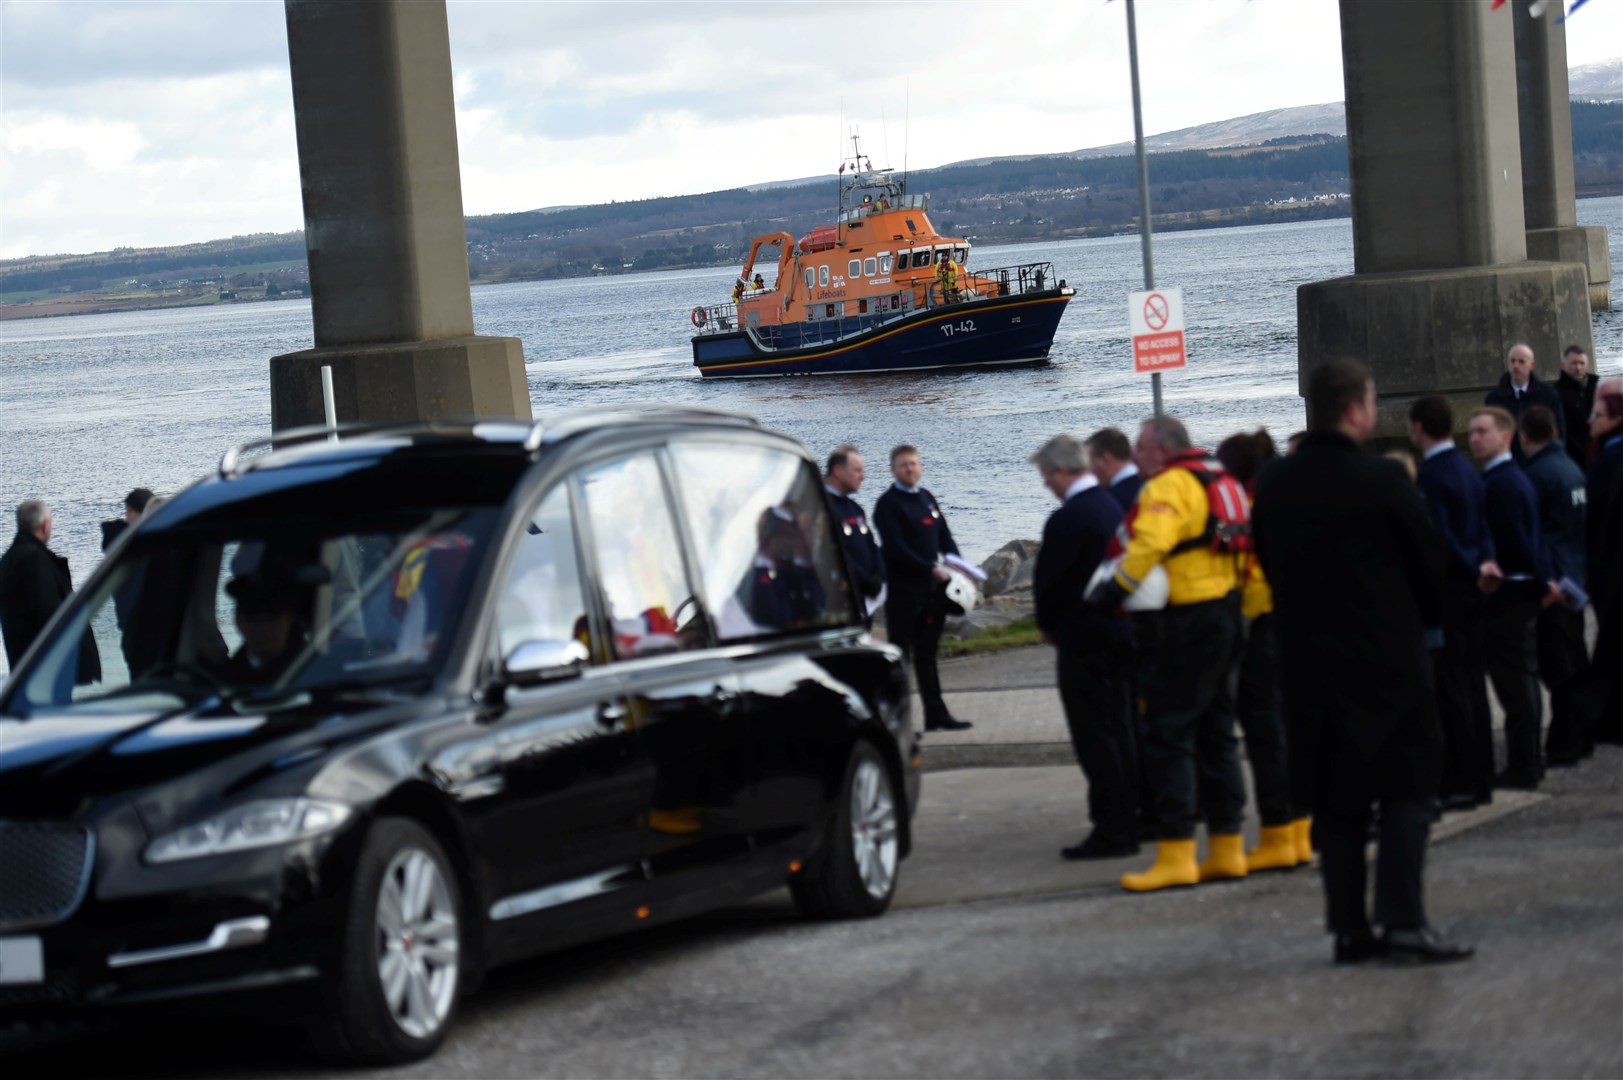 Guard of honour stands by with lifeboat in background.